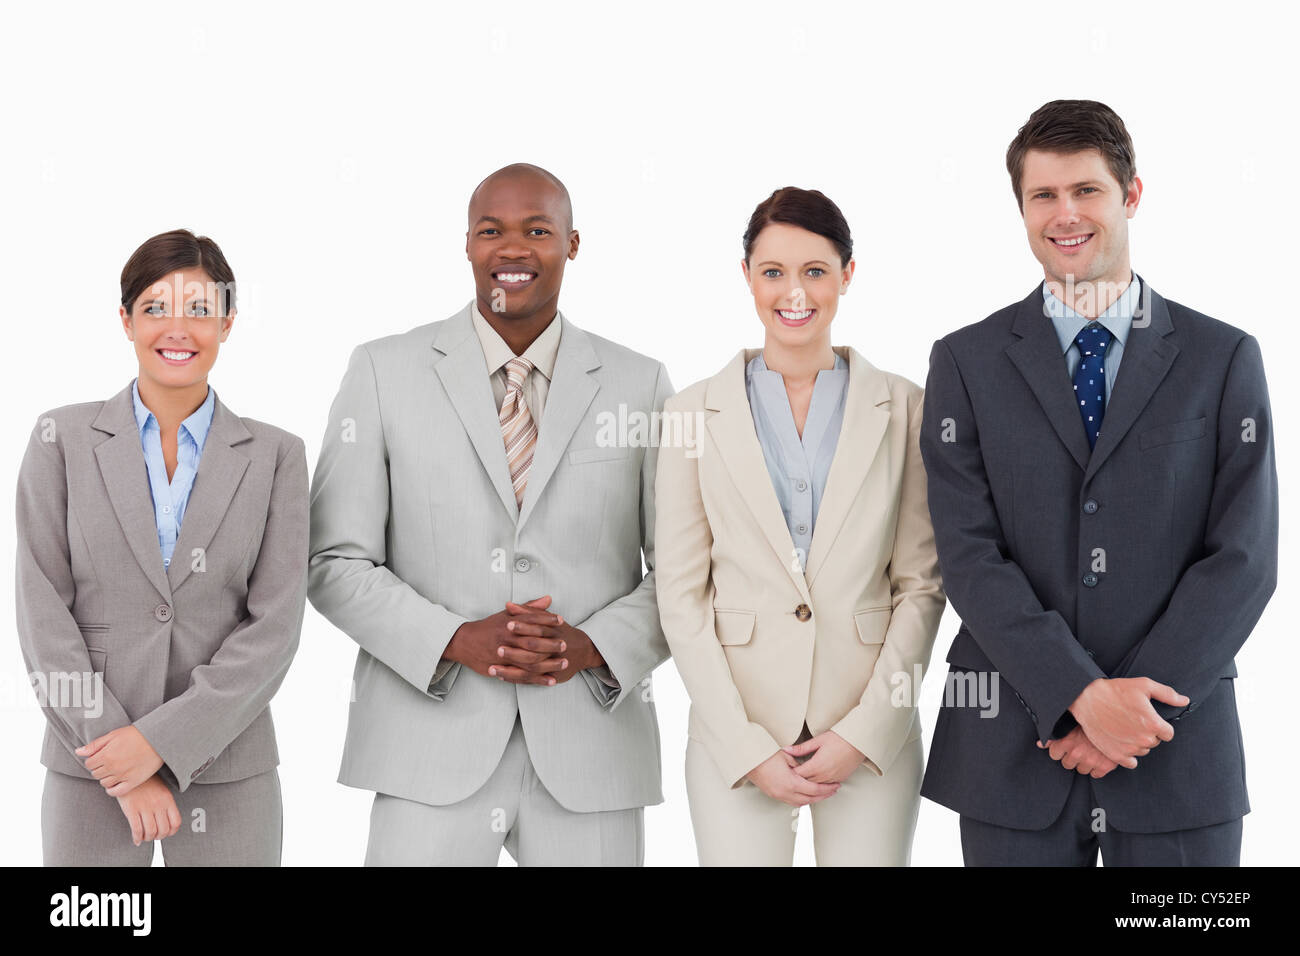 Smiling business partners standing together Stock Photo